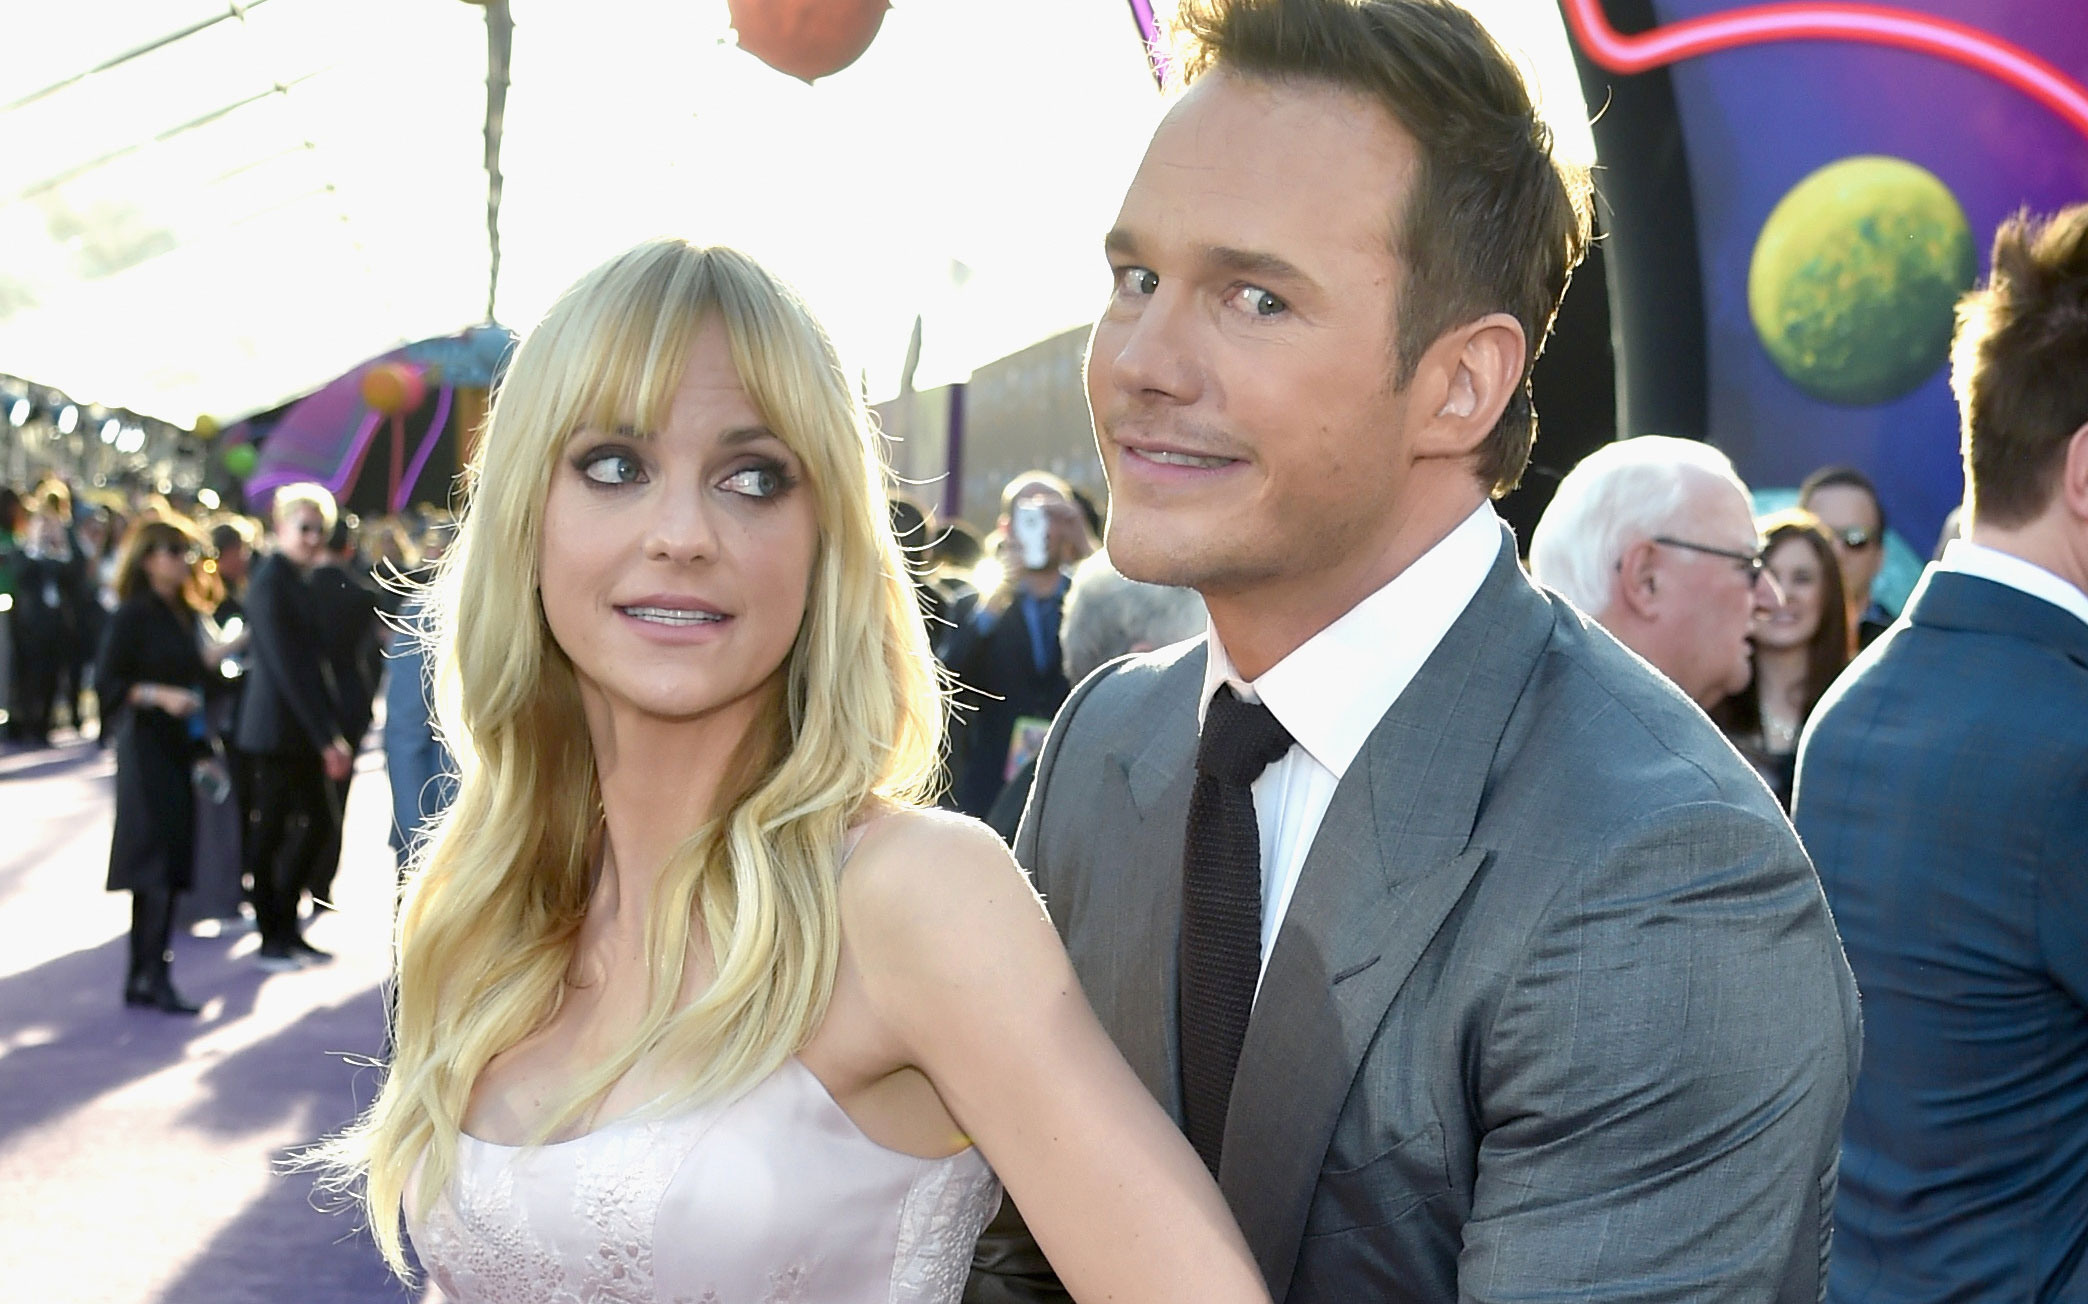 Anna Faris Is Selling Her And Chris Pratt’s Home & It’s Really Over, Huh